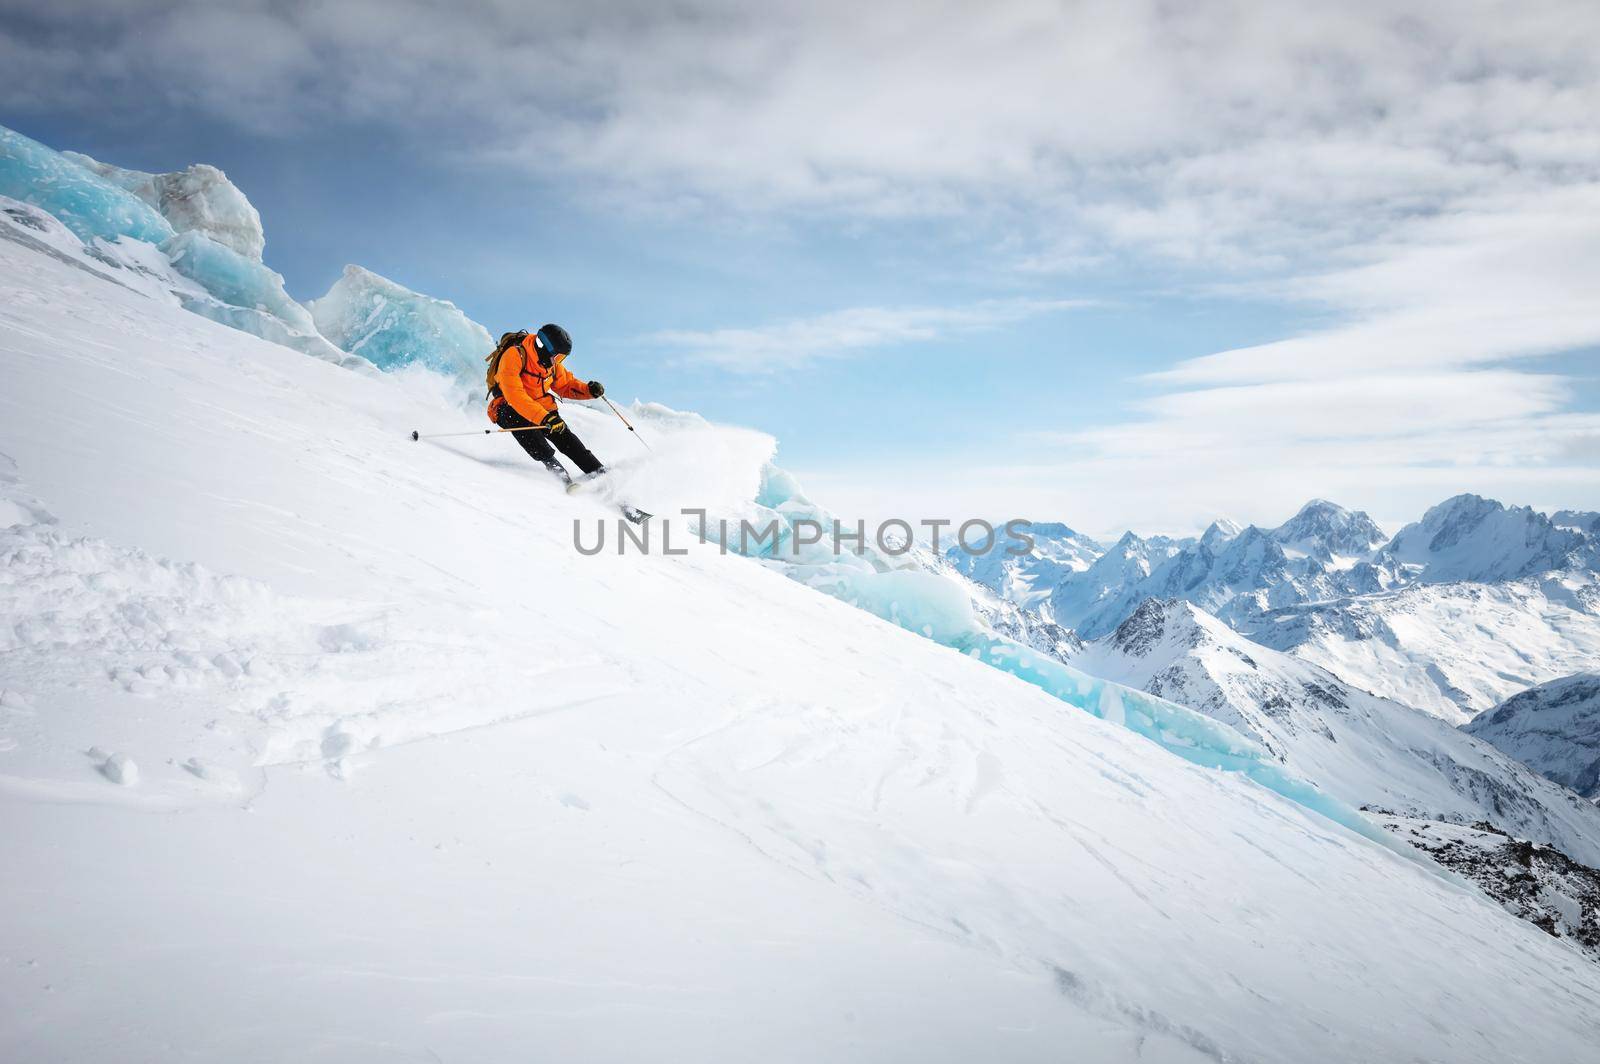 Professional skier ride at speed on a snowy slope against the backdrop of a glacier and high snow-capped mountains on a sunny day. Ski resort space copy presentation.